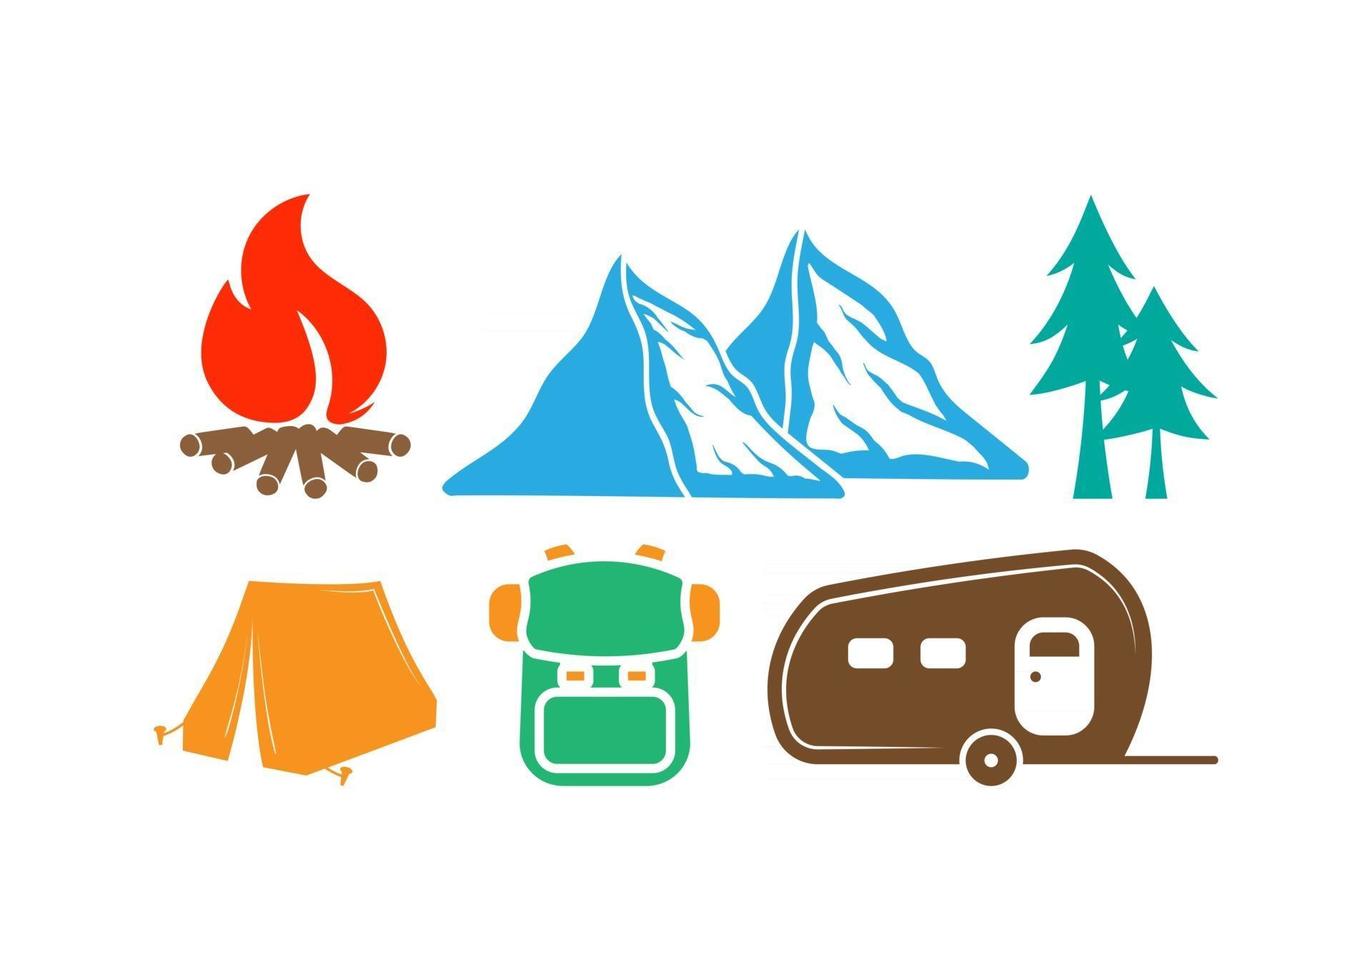 Camping icon design template vector illustration isolated